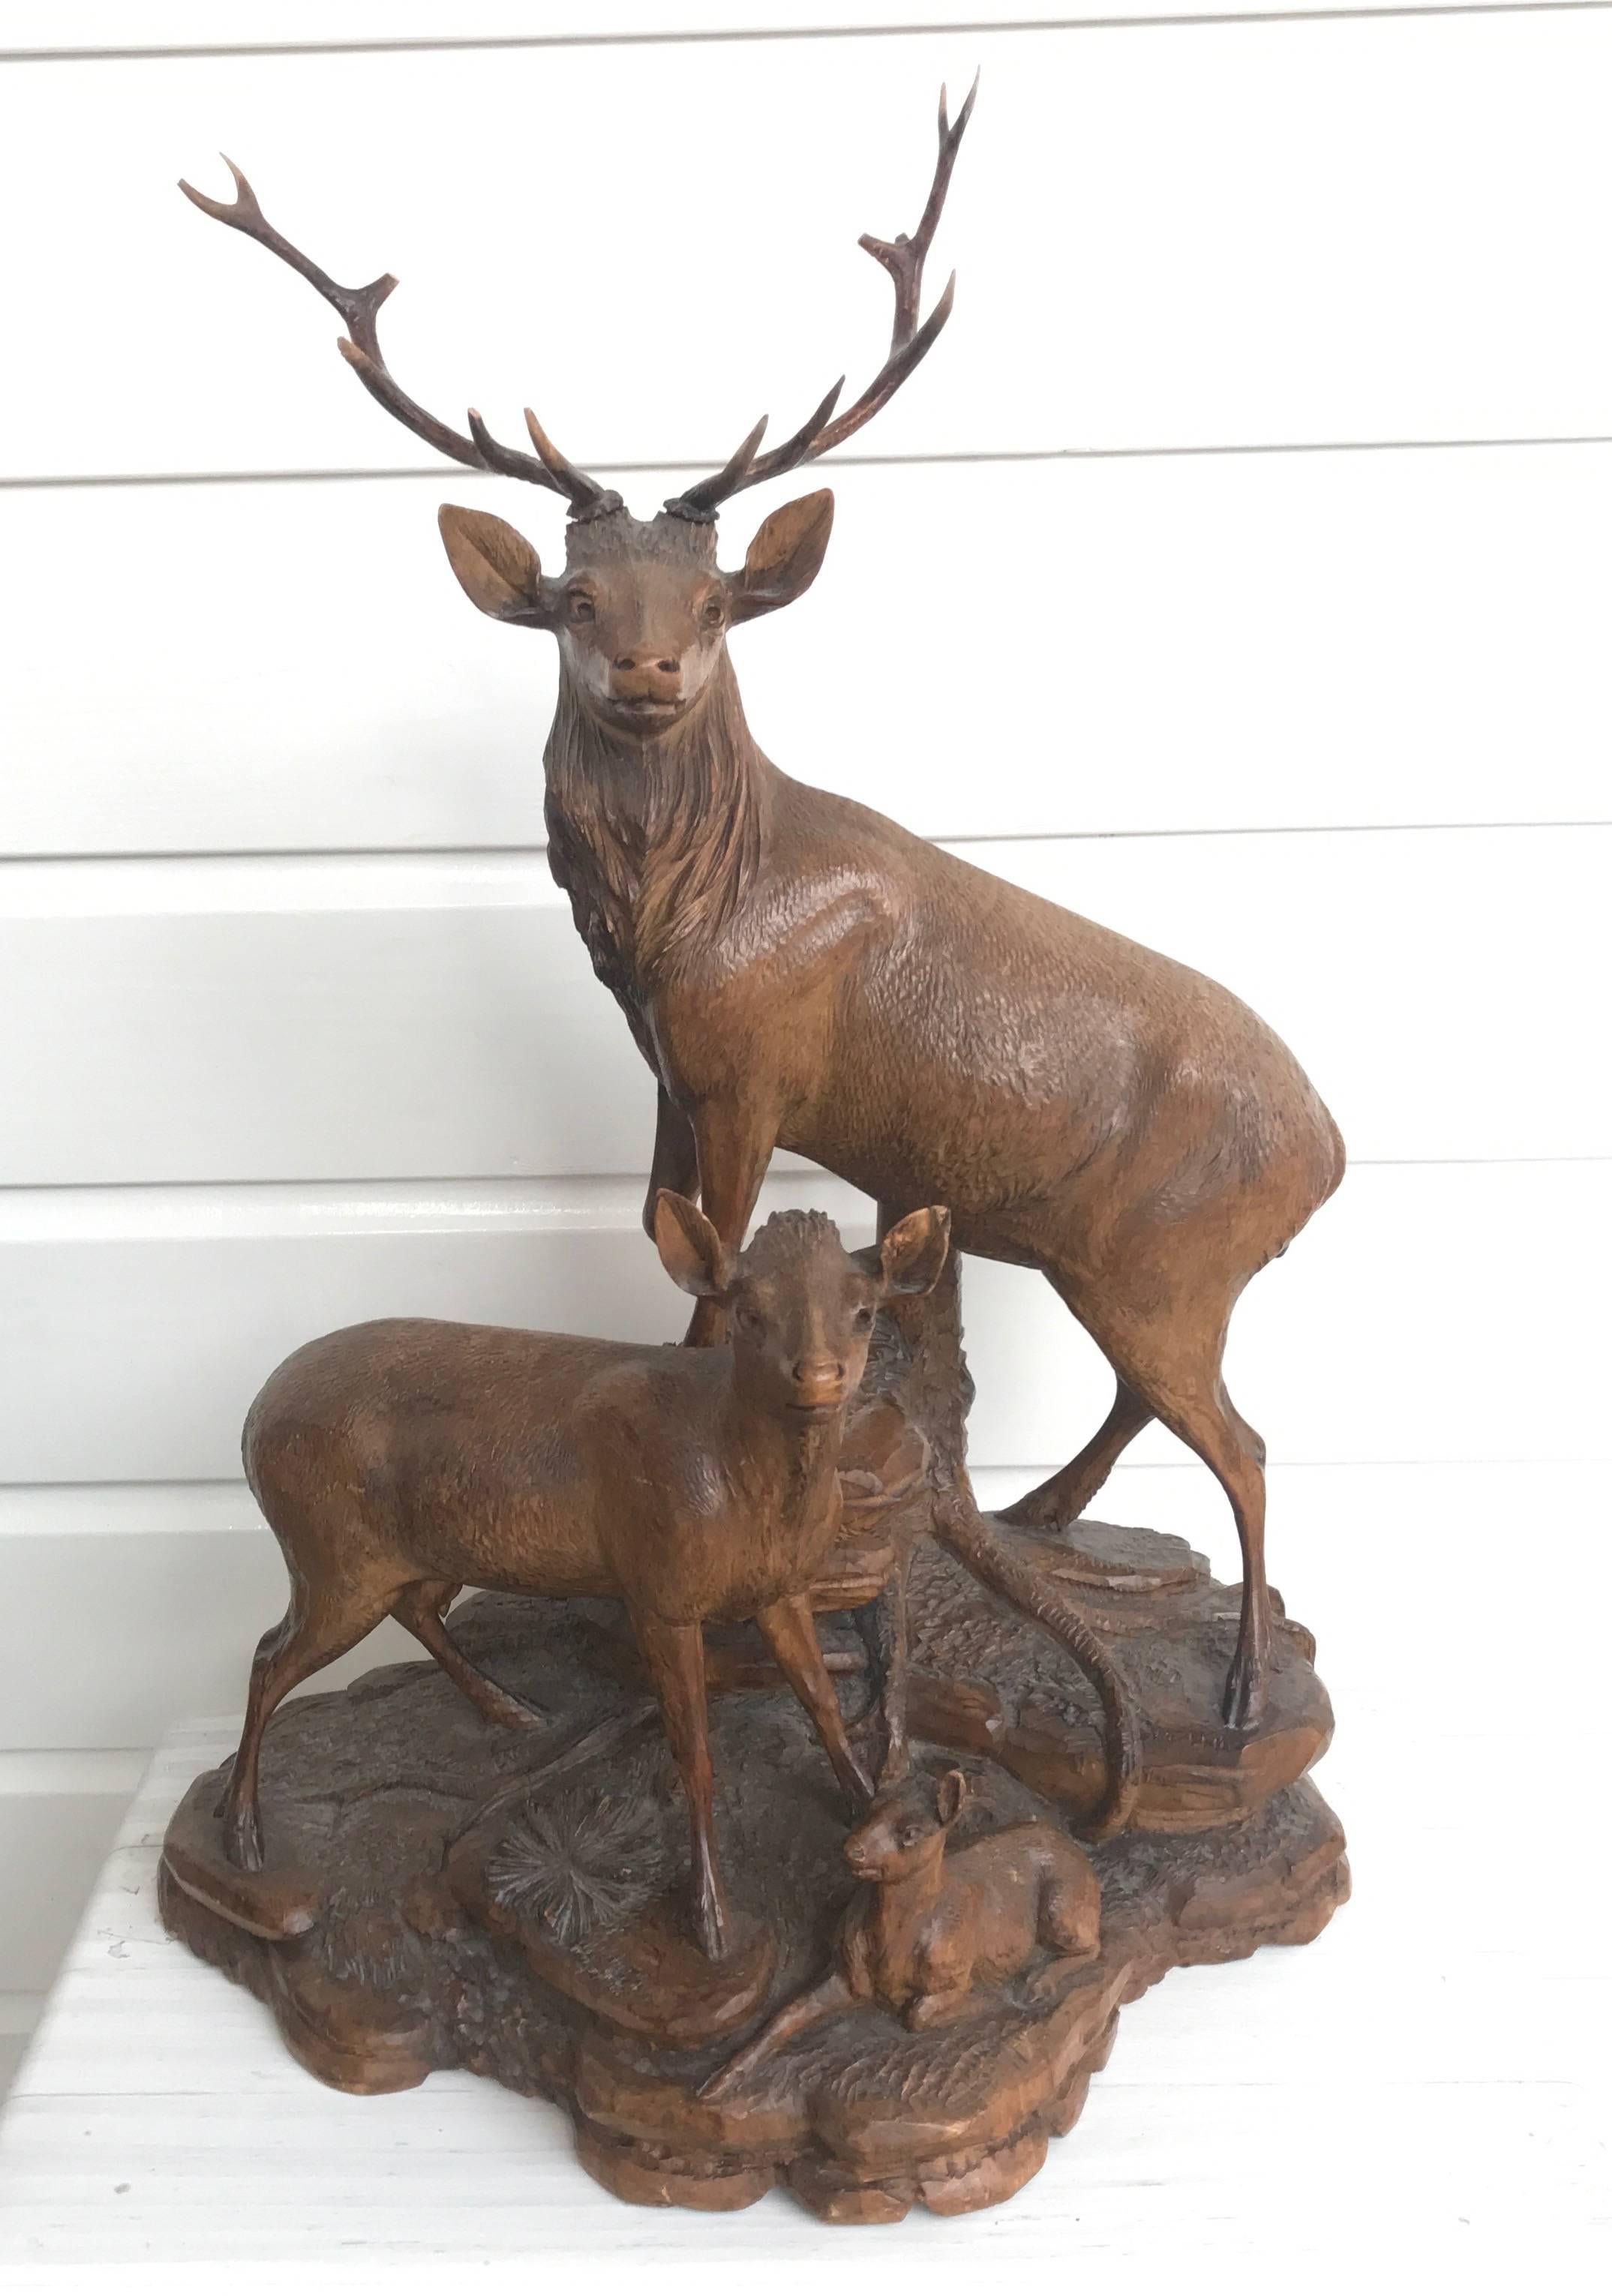 Exceptionally carved red deer group.

This majestic stag with antlers is clearly the head of his family. The master carver who created this impressive center piece in the late 1800s has done an outstanding job in portraying this deer family. The